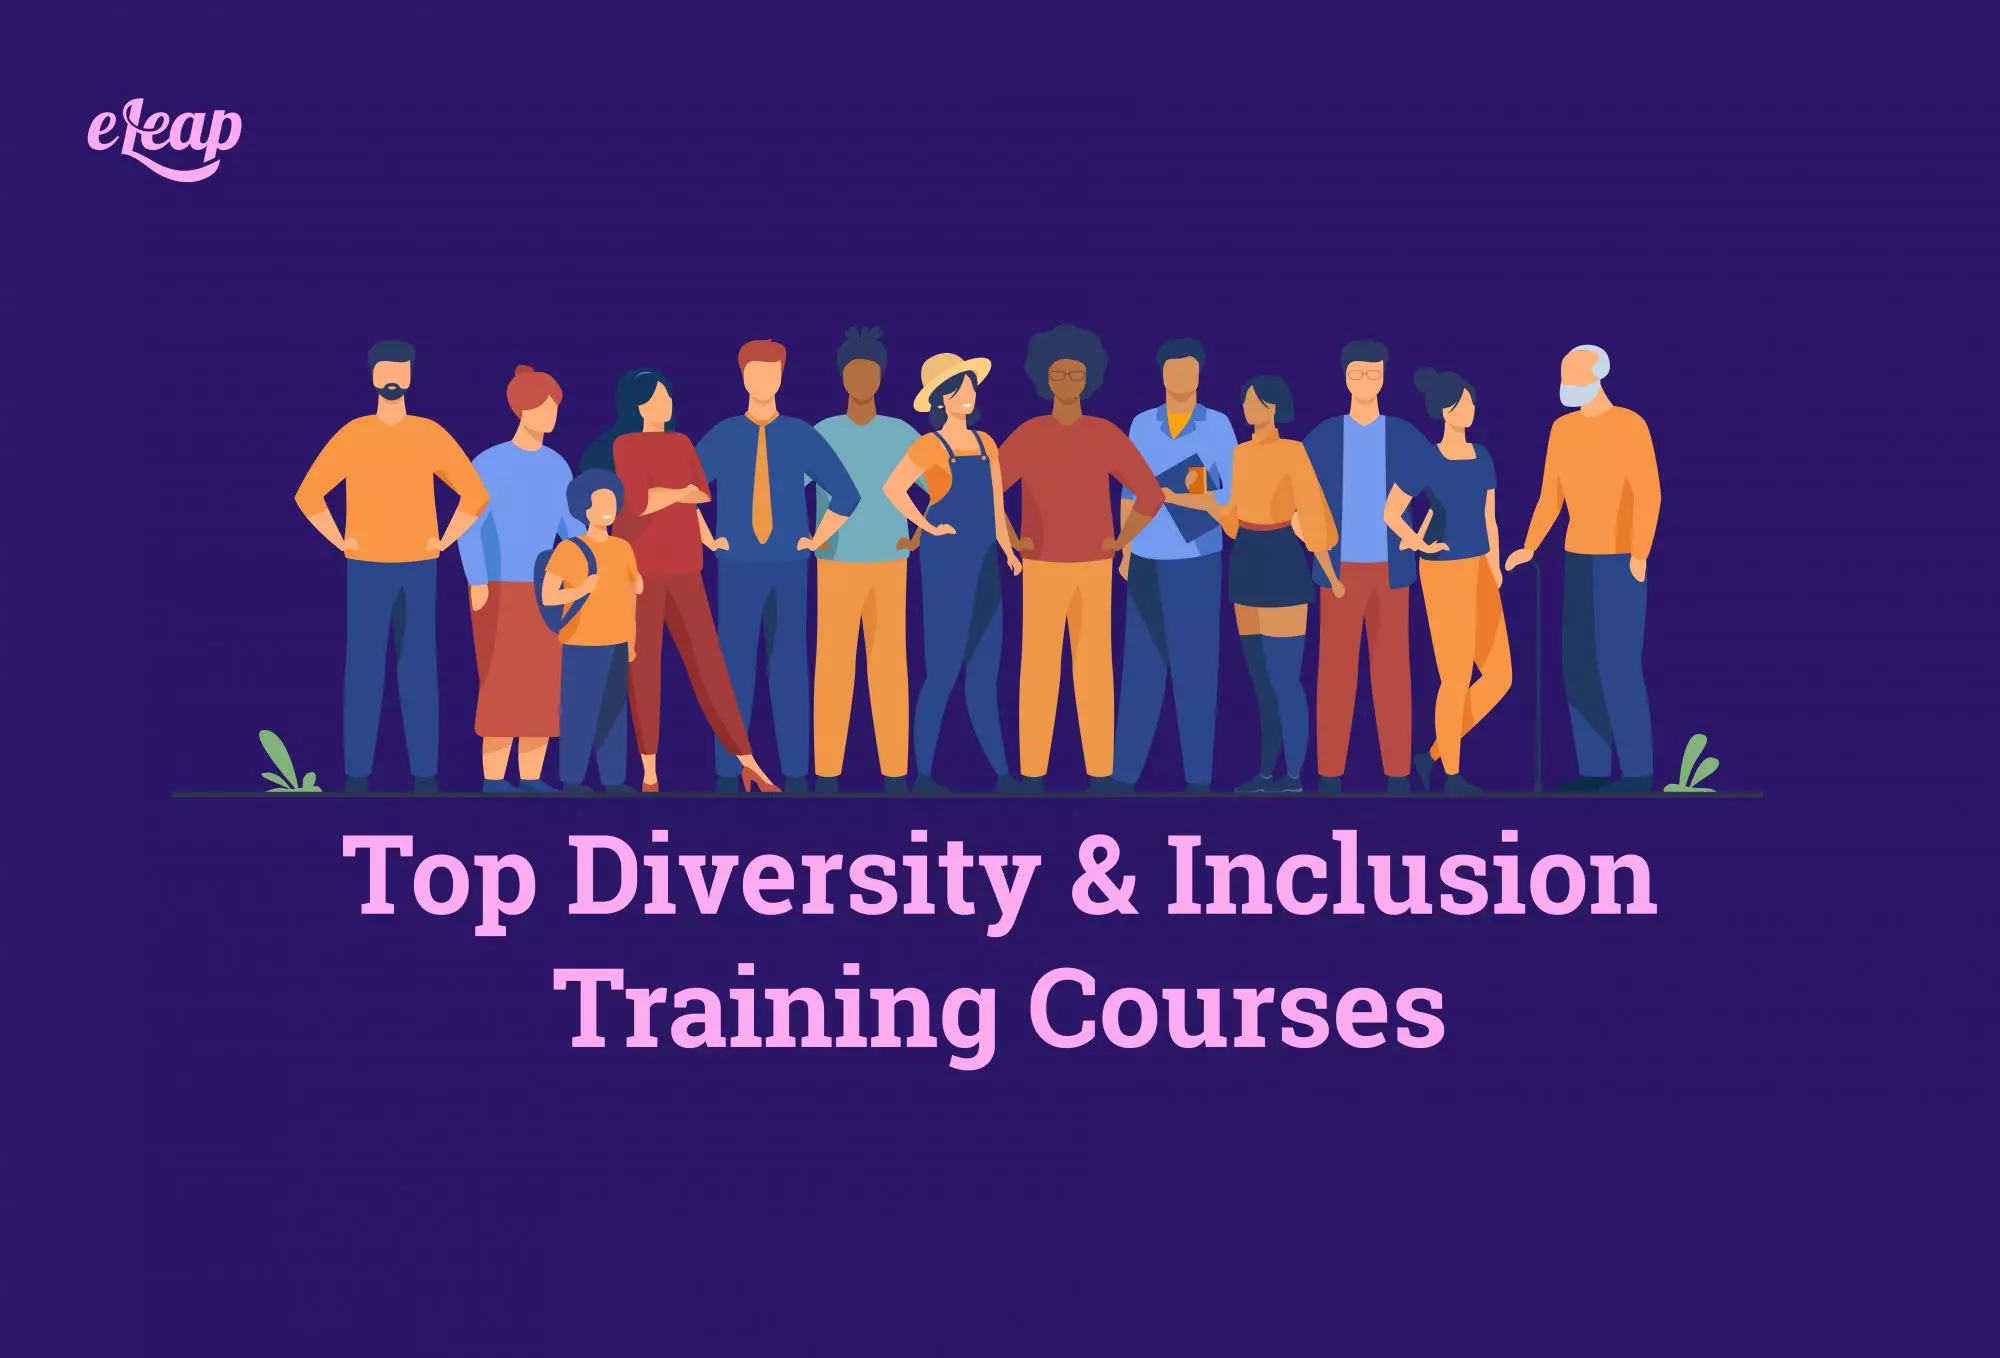 Top diversity and inclusion training courses